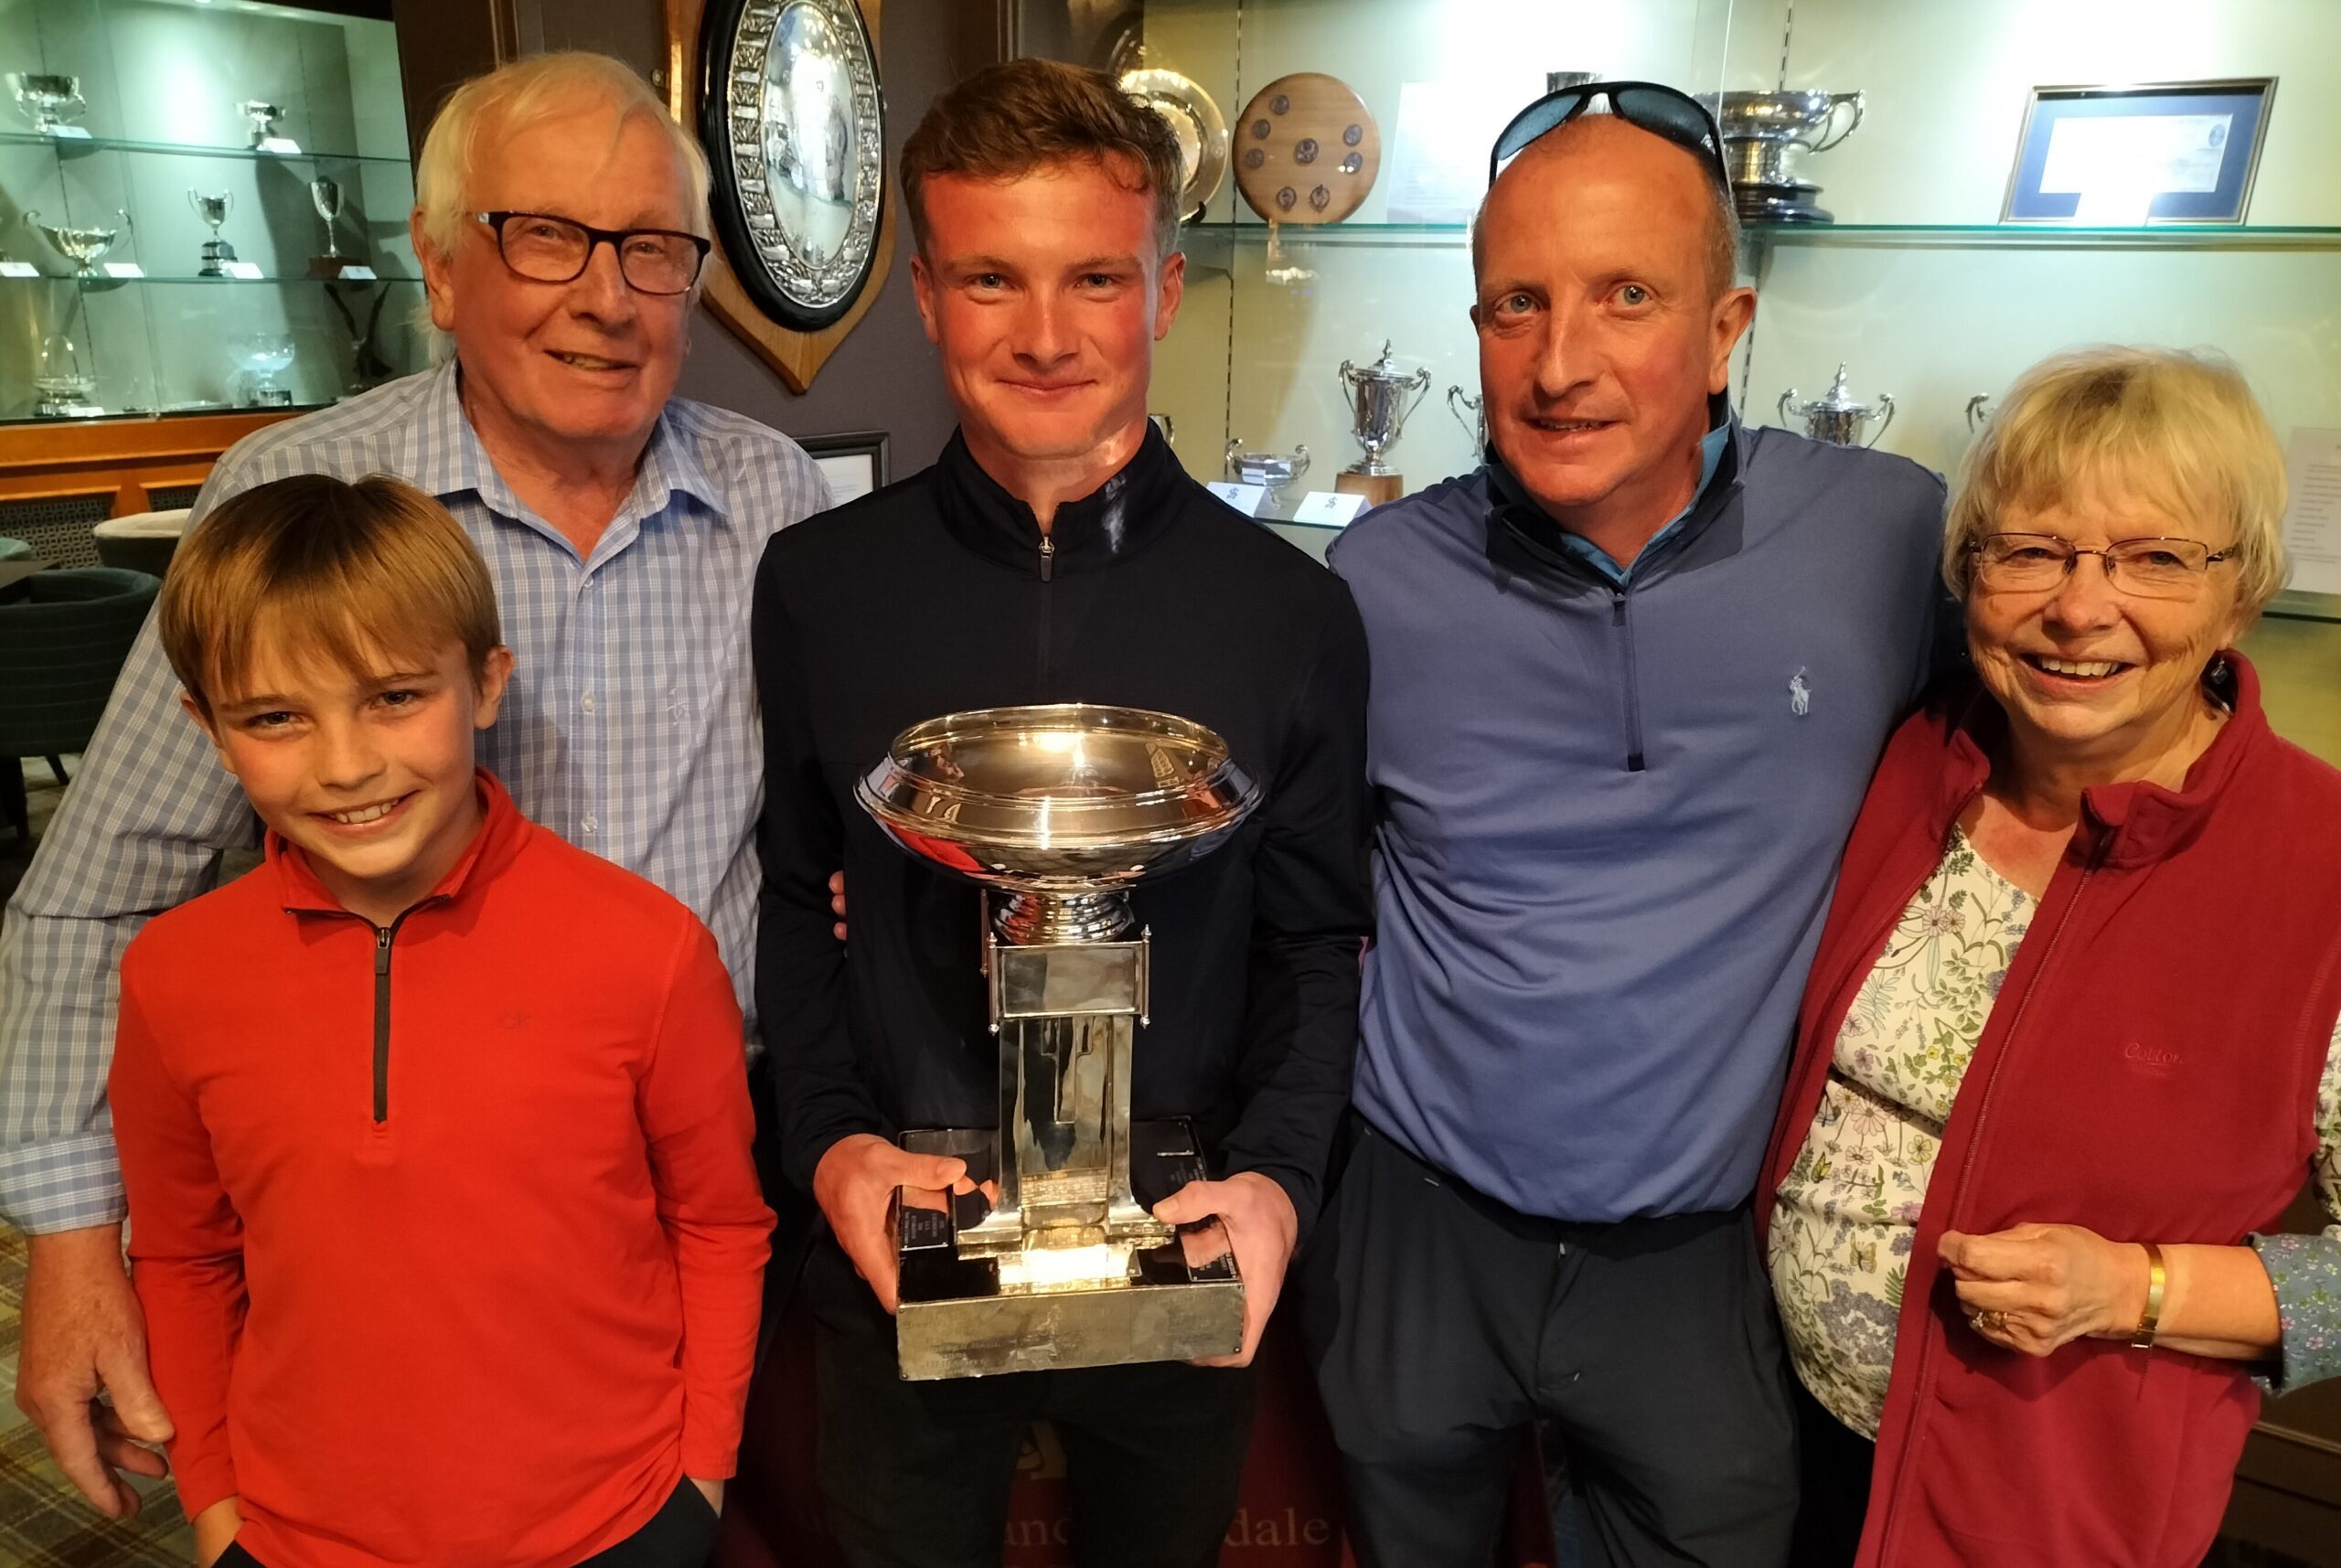 S&A Bowl champion James Holland surrounded by grandparents Norman and Margaret Holland, dad John and little brother Jude